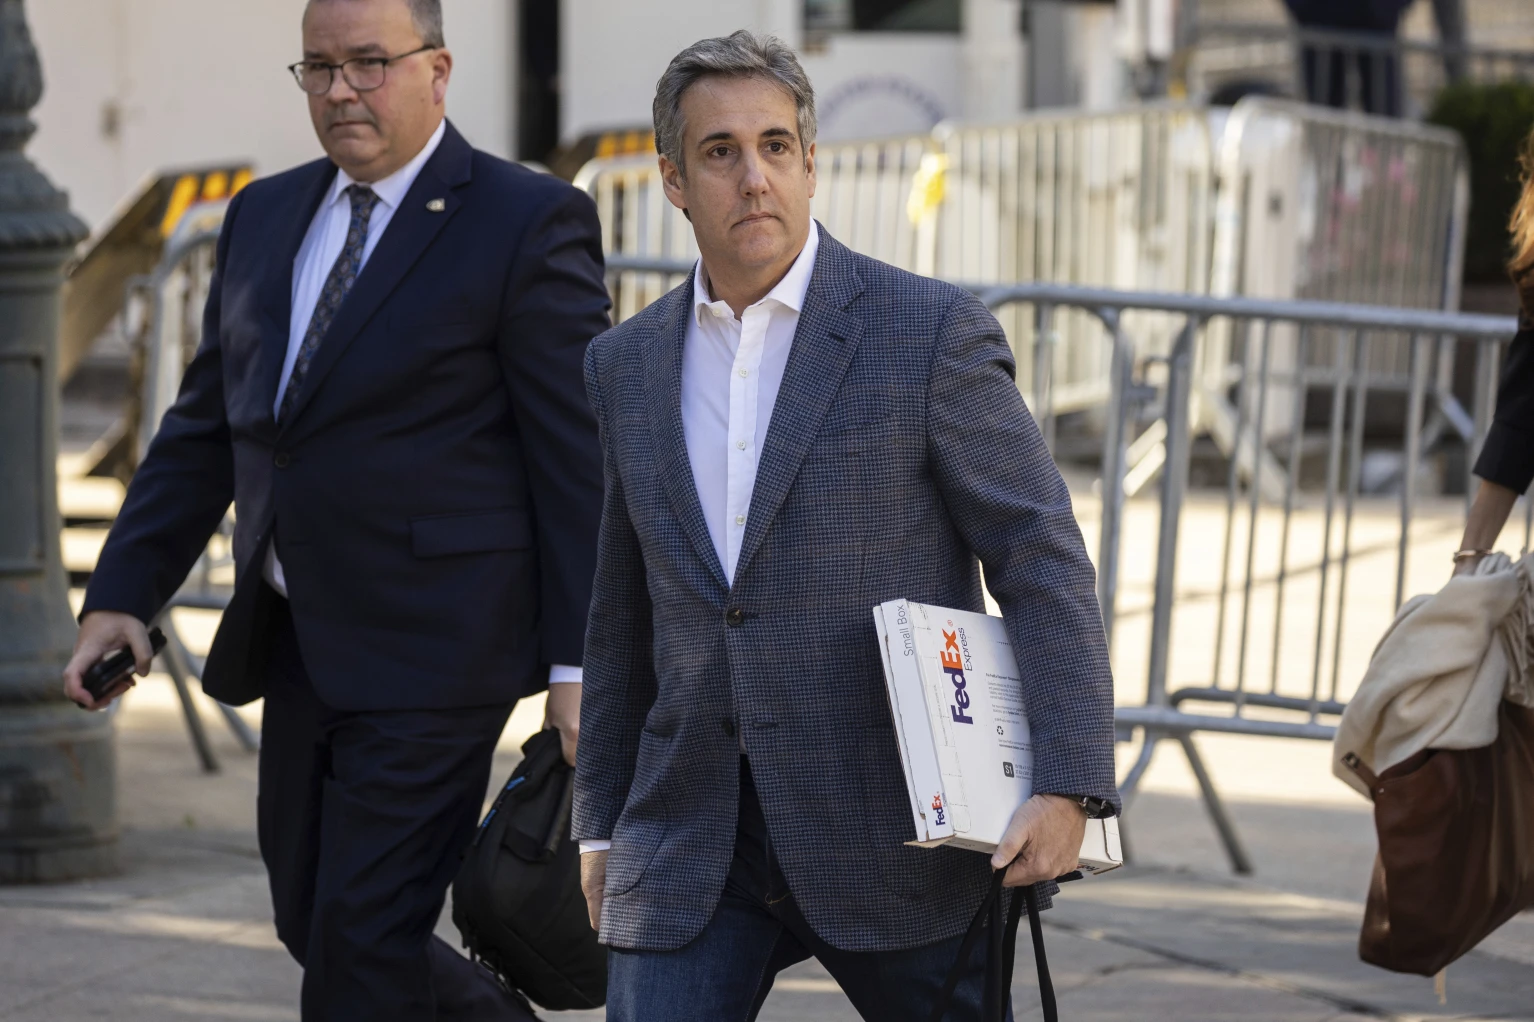 Trump’s ex-fixer Michael Cohen takes stand against former president who mocked him as ‘proven liar’